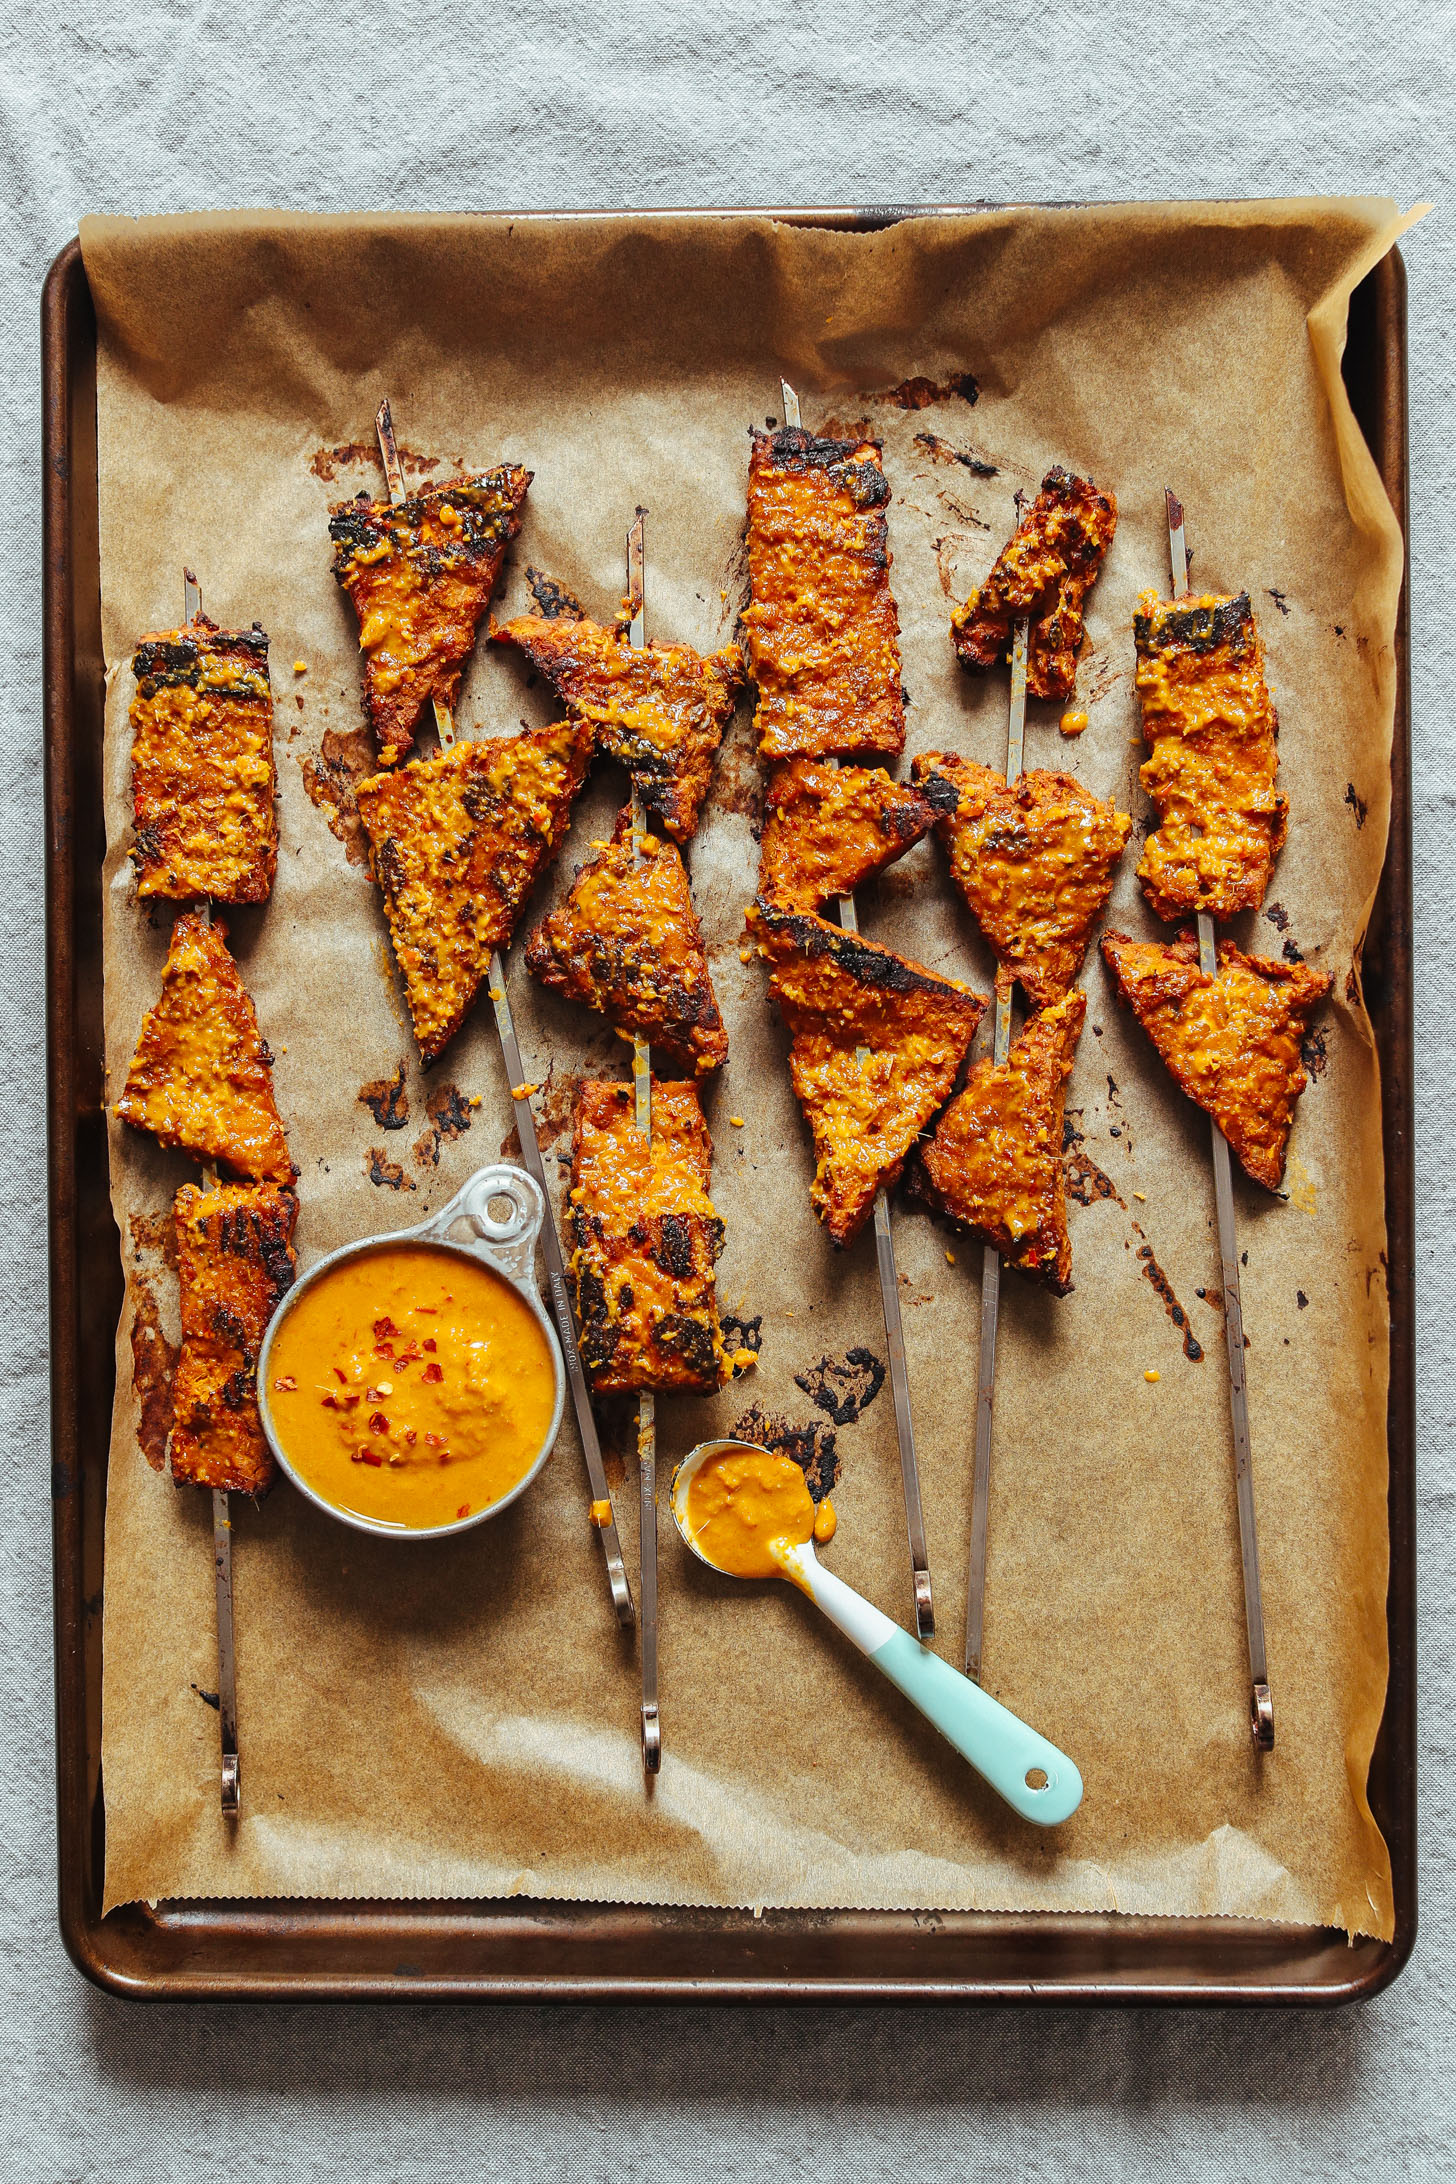 Parchment-lined baking sheet with gluten-free vegan Lemongrass Tempeh Satay skewers and dipping sauce